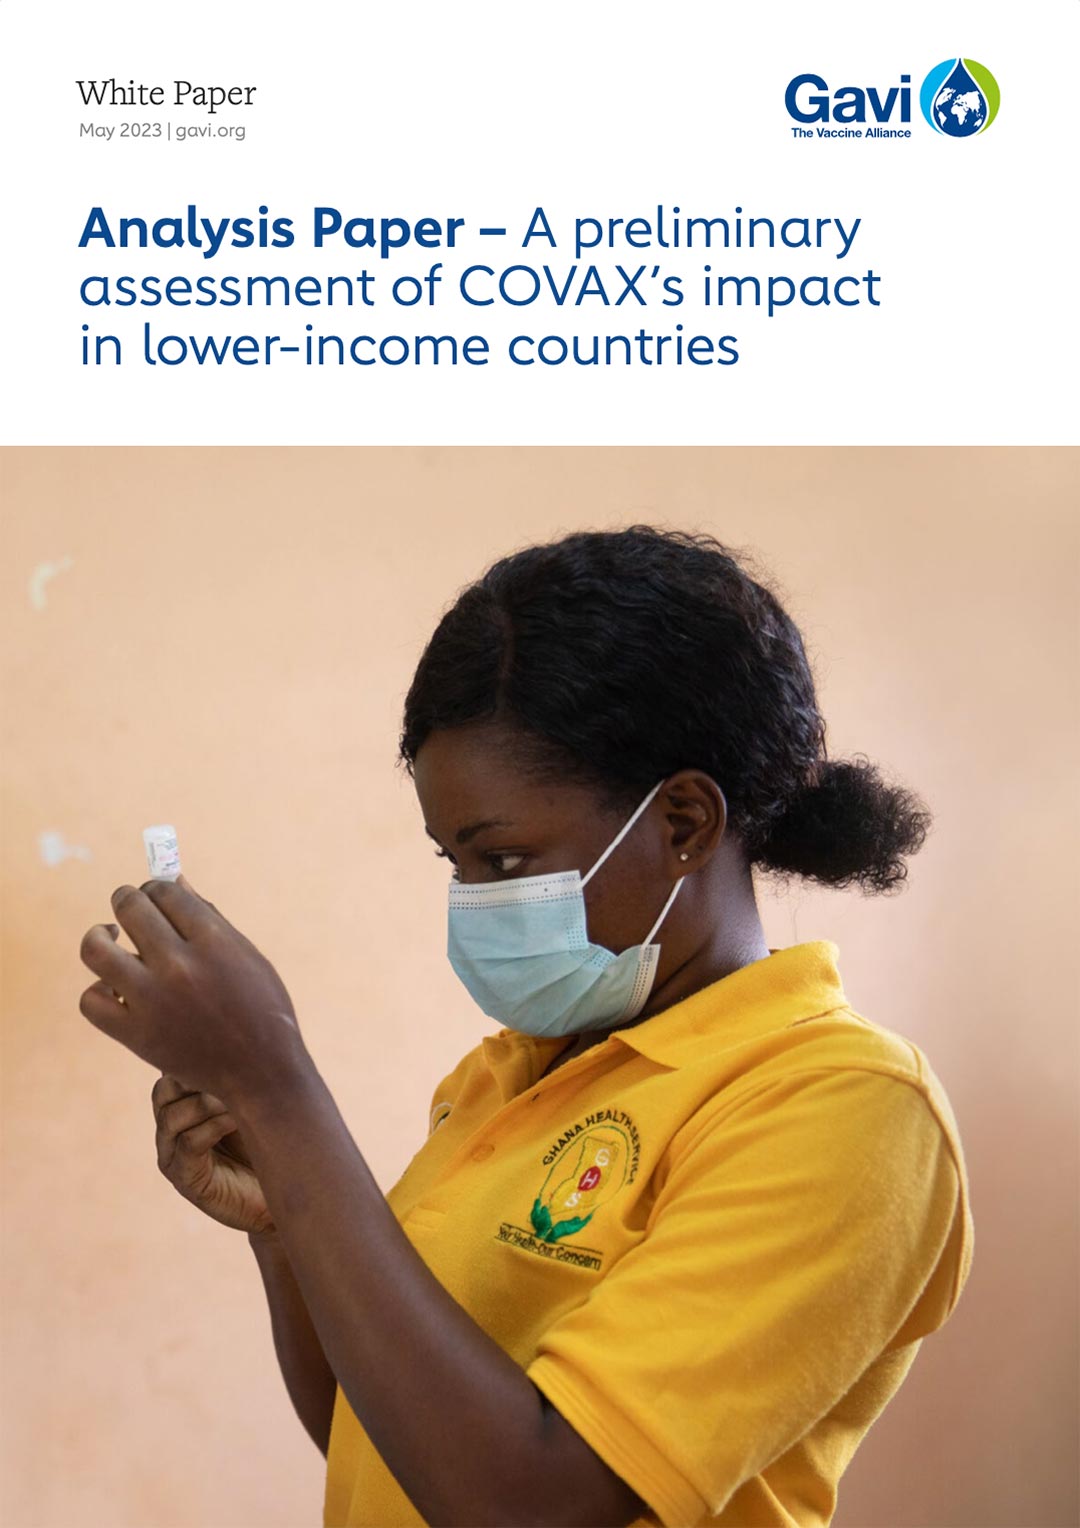 A preliminary assessment of COVAX’s impact in lower-income countries